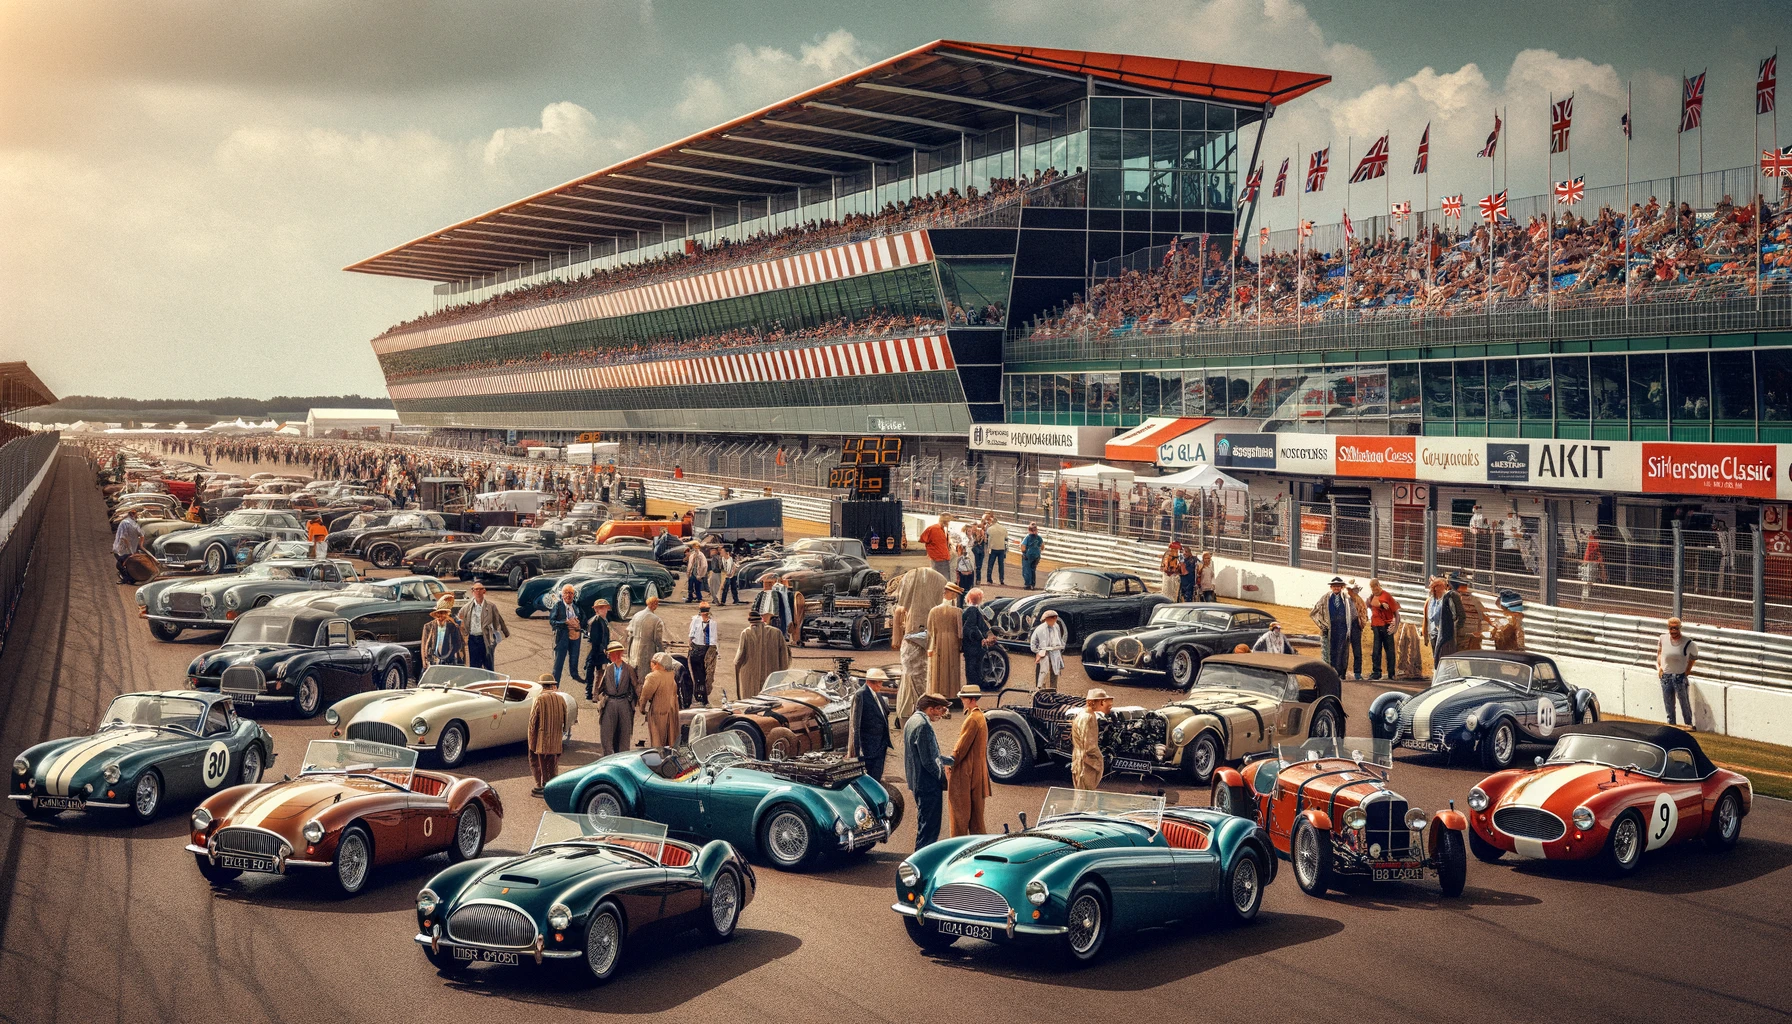 Pic of Cars and drivers at the Silverstone Classic event